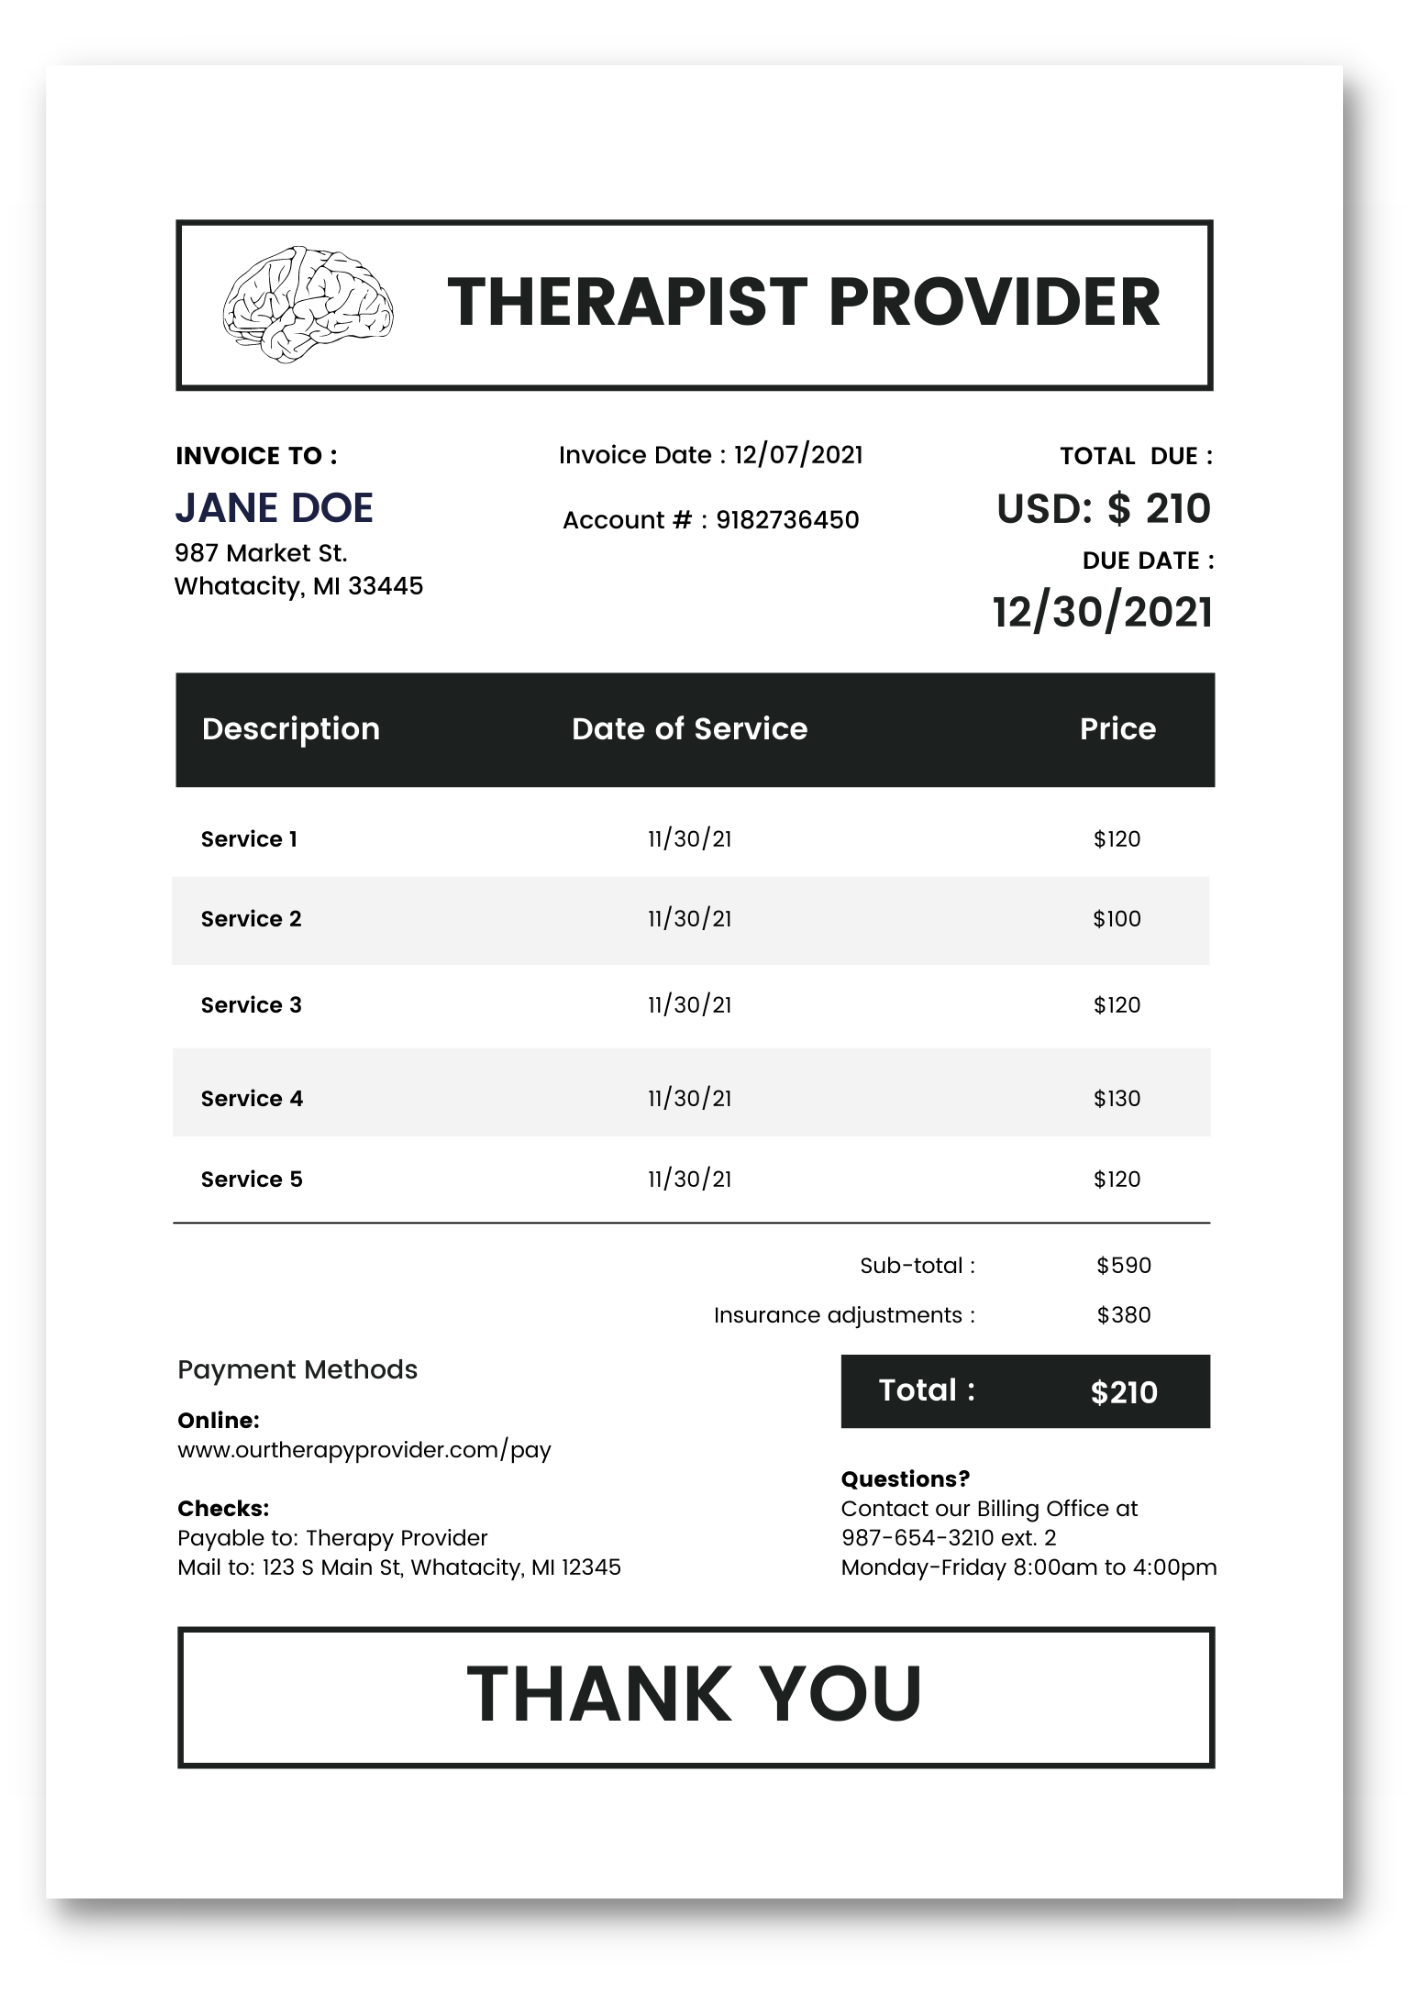 editable-invoice-letterhead-templates-for-therapists-websites-for-psychotherapy-receipt-template